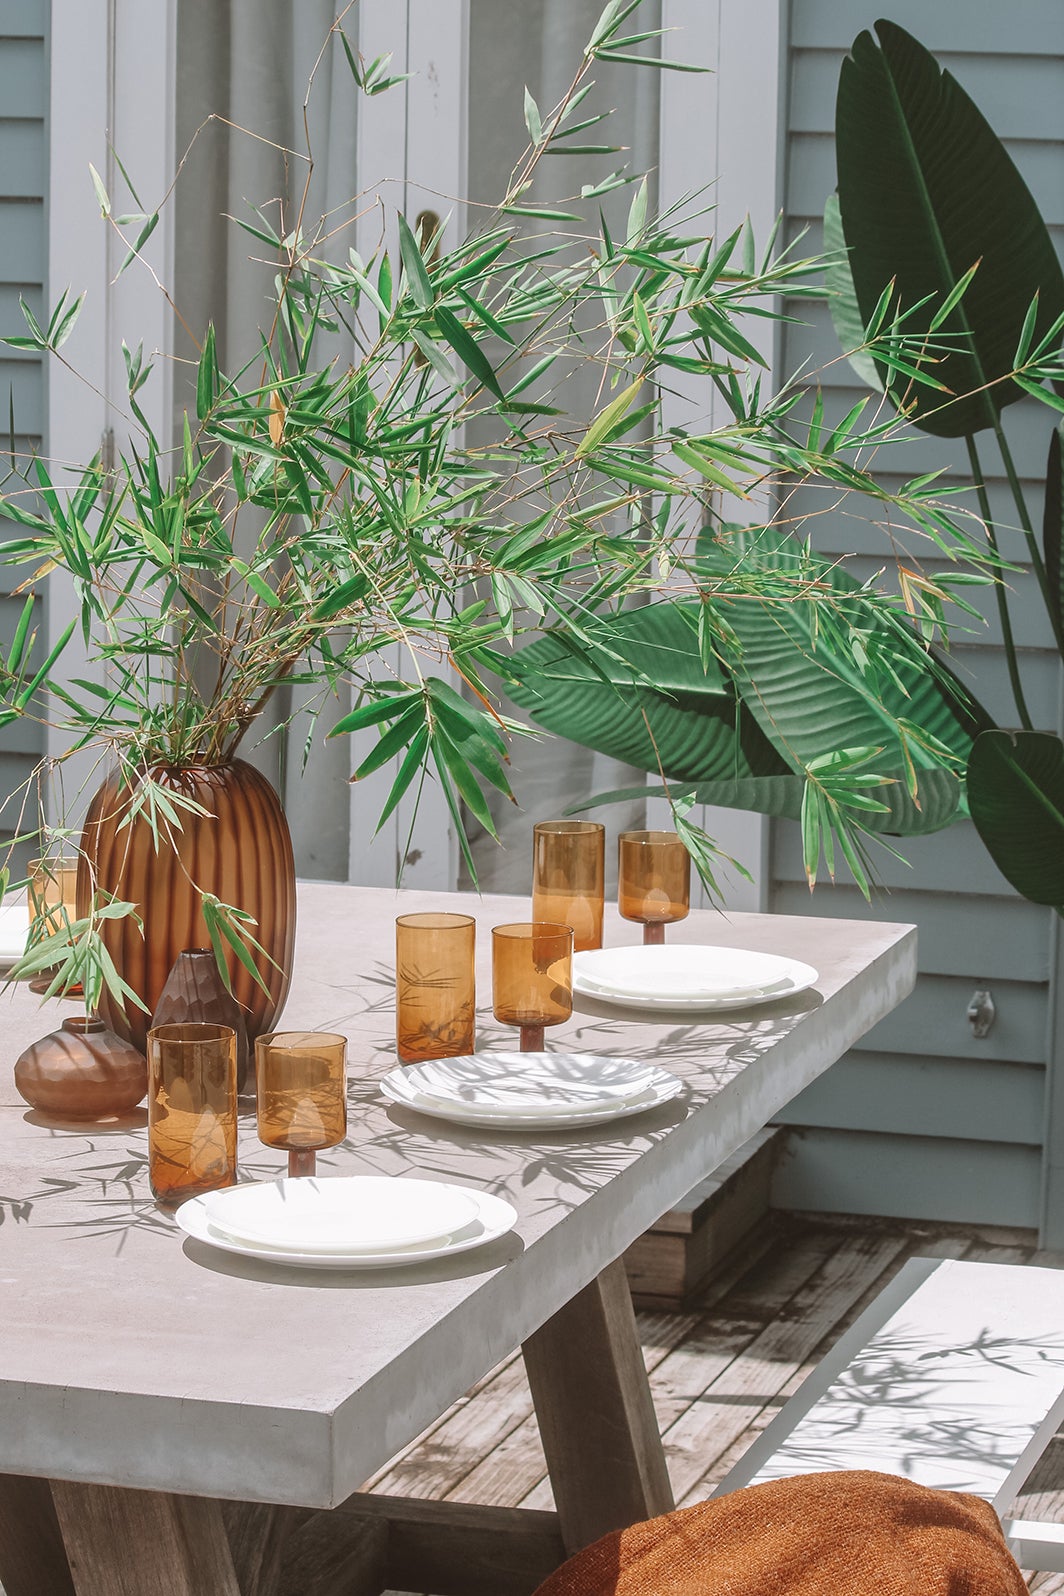 How to: Style outdoor dining 